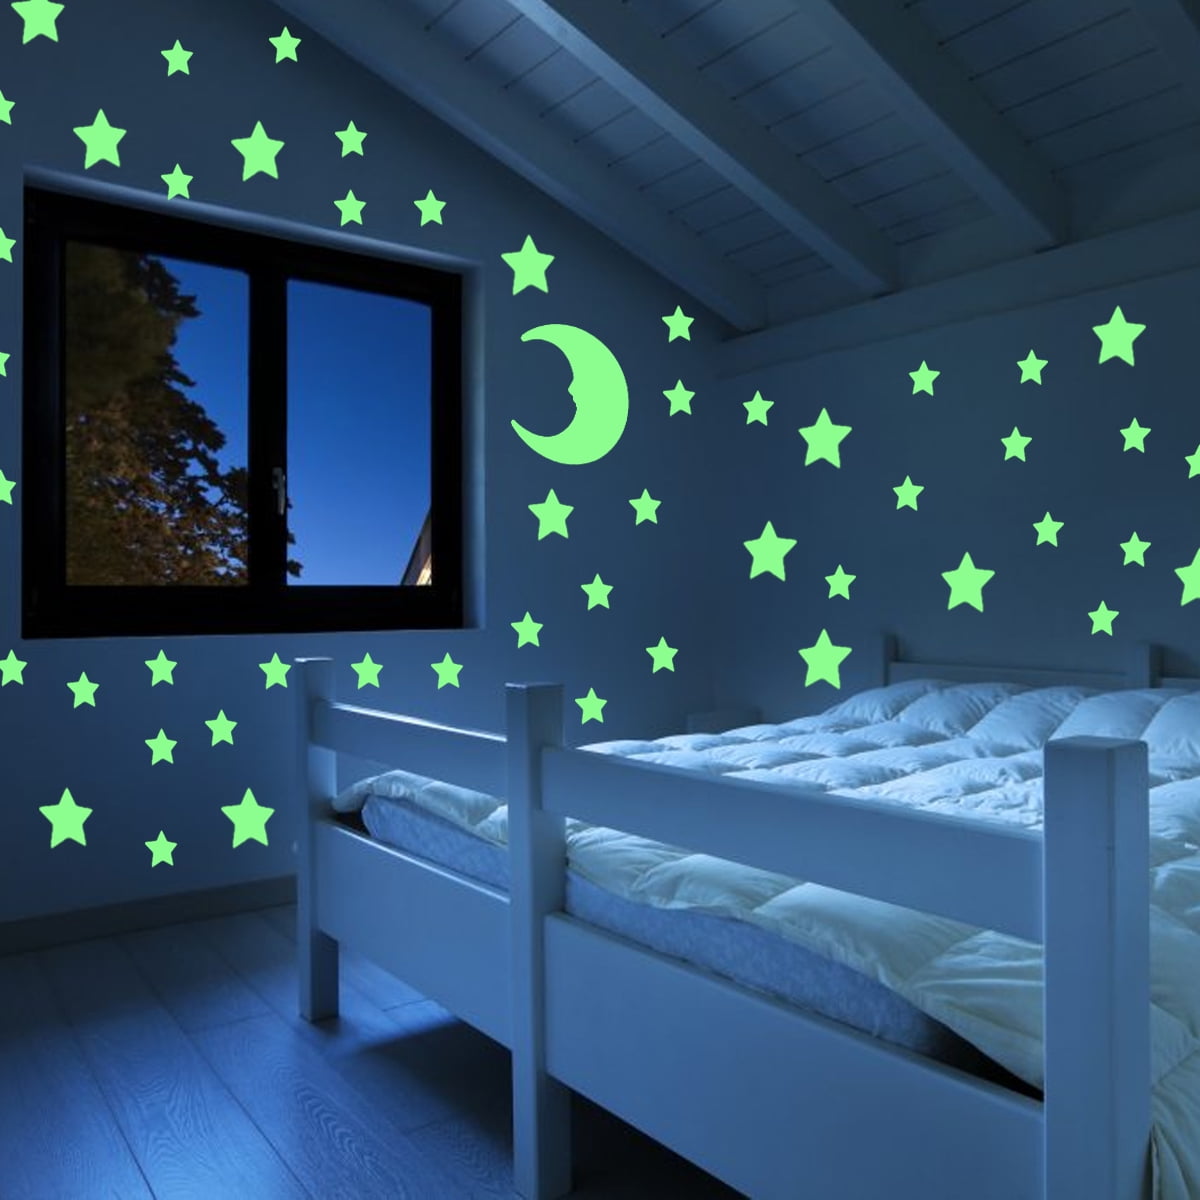 100X Glow in The Dark 3D Moon Stars Stickers Decal Ceiling Wall Bedroom DIY NEW 